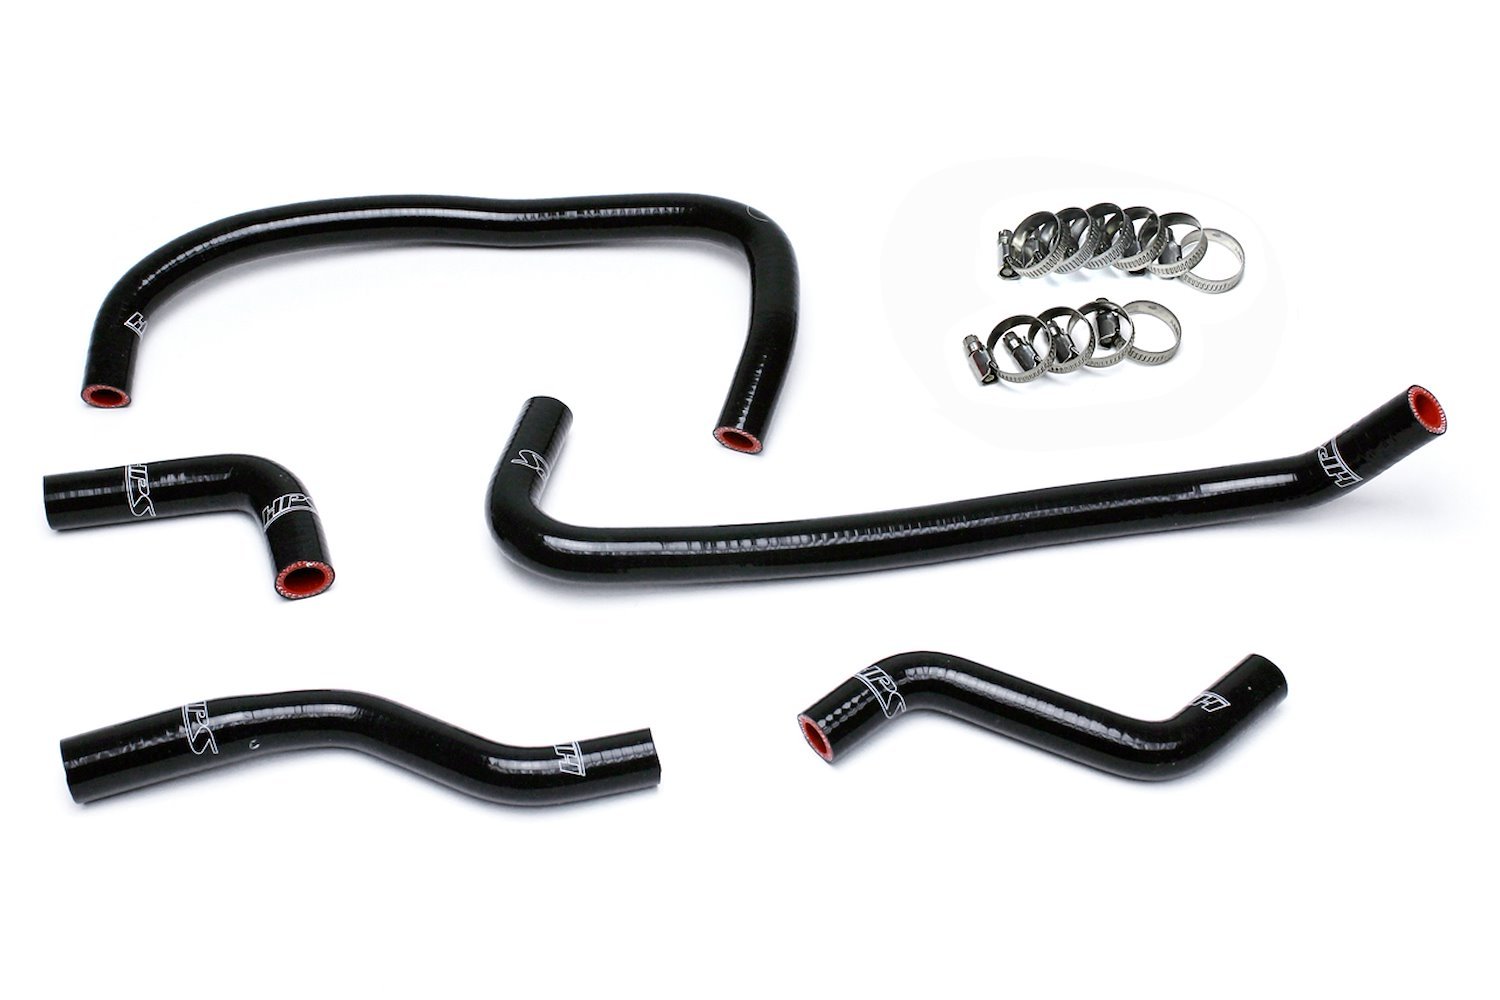 57-1503H-BLK Heater Hose Kit, High-Temp 3-Ply Reinforced Silicone, Replace OEM Rubber Heater Coolant Hoses